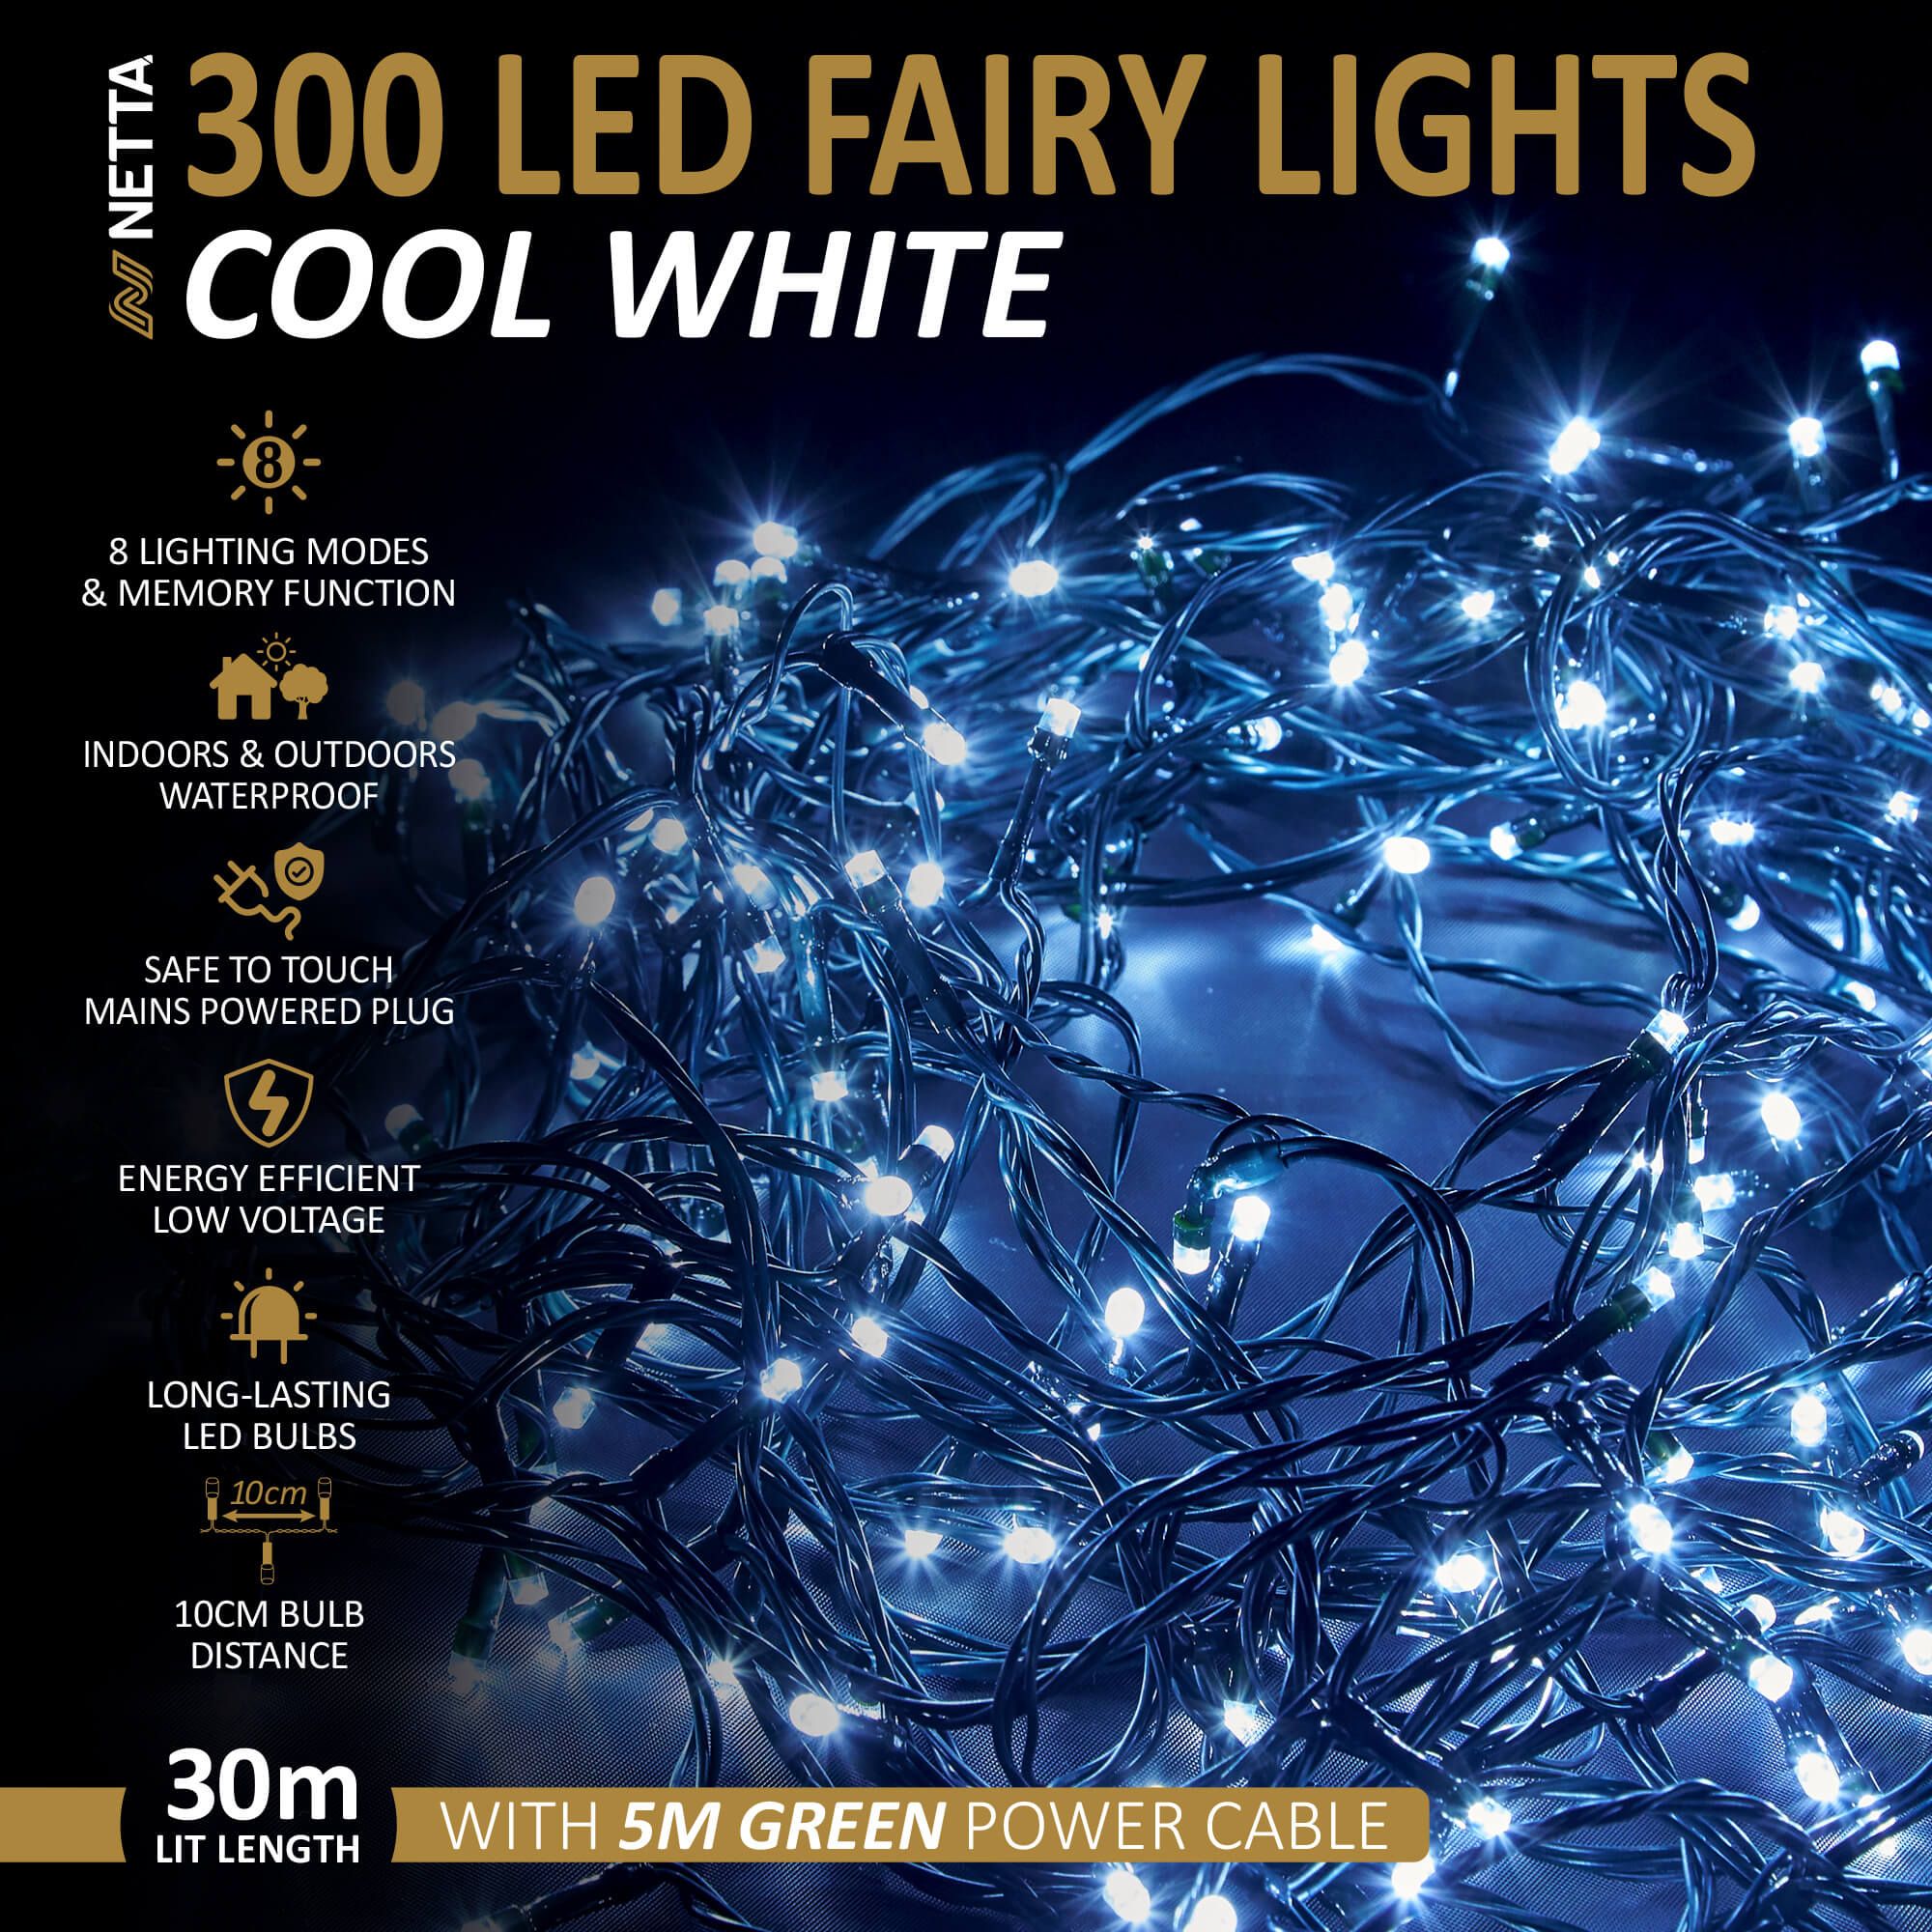 300 LED 30M Fairy String Lights Outdoor and Indoor Plug In - Cool White